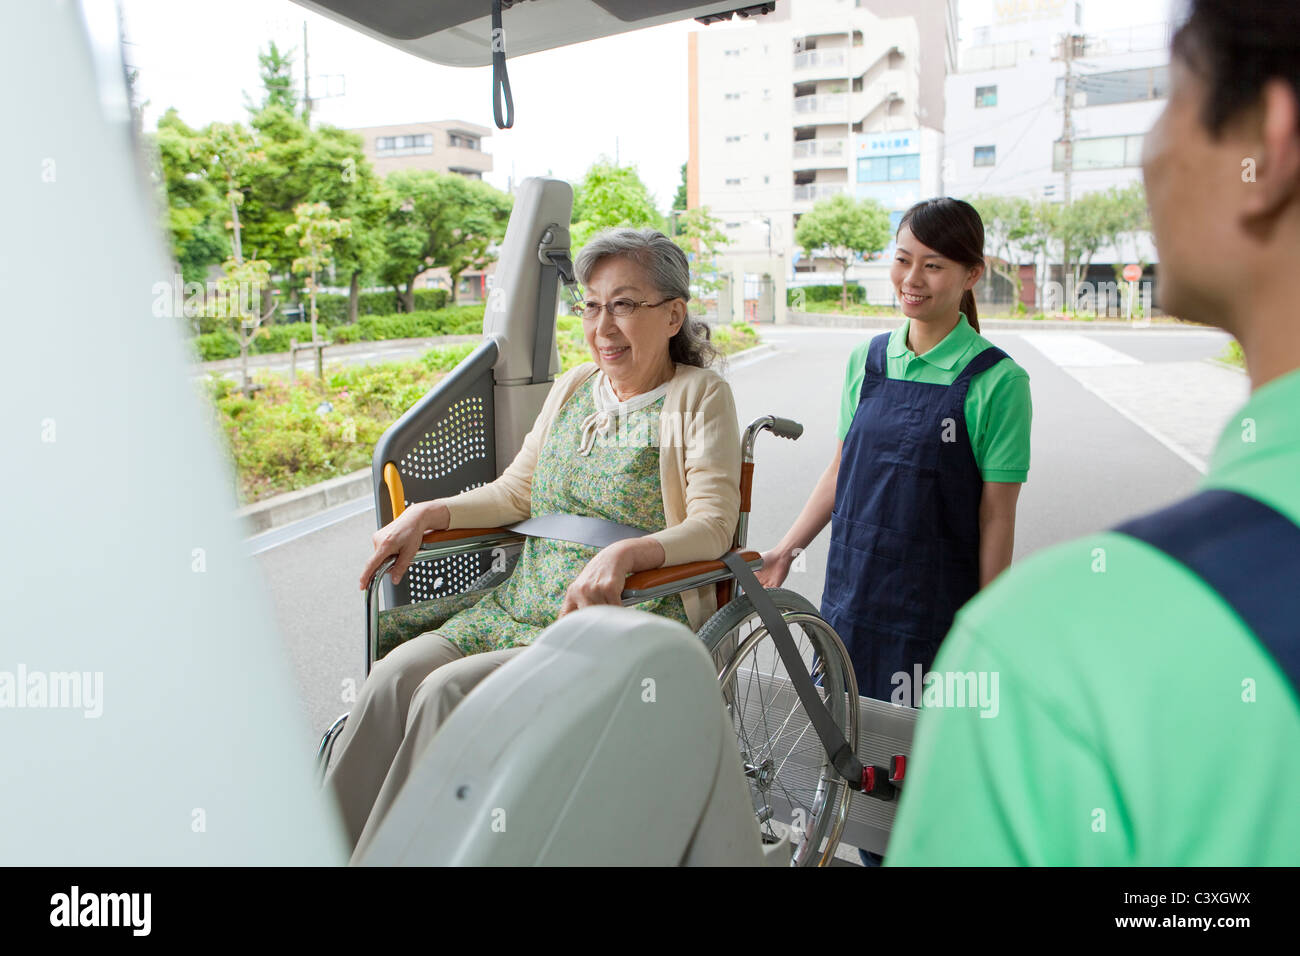 Healthcare workers helping senior woman in wheelchair getting into a van, Kanagawa Prefecture, Honshu, Japan Stock Photo